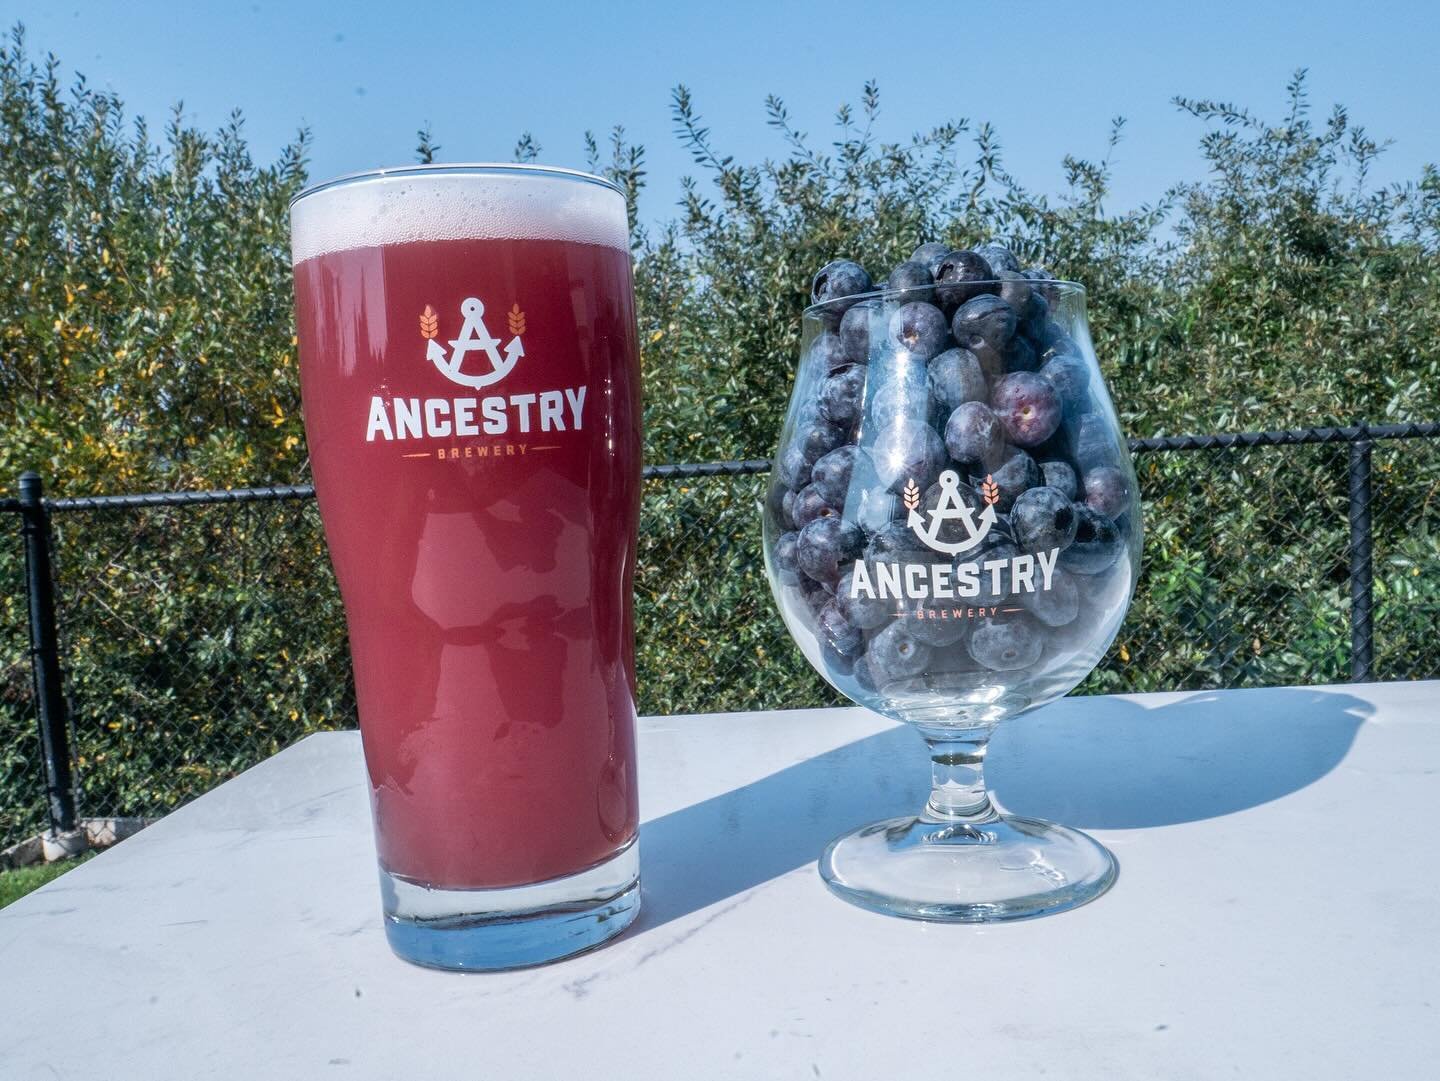 Blueberry Wheat is back on tap!!! Jam packed with blueberry puree from Oregon Fruit Products, you&rsquo;ll get jammy fruit character on top of our American Wheat soft base.  #pdx #pdxcraftbeer #portlandcraftbeer #pdxfoodies #pdxfoodie #portlandfoodie